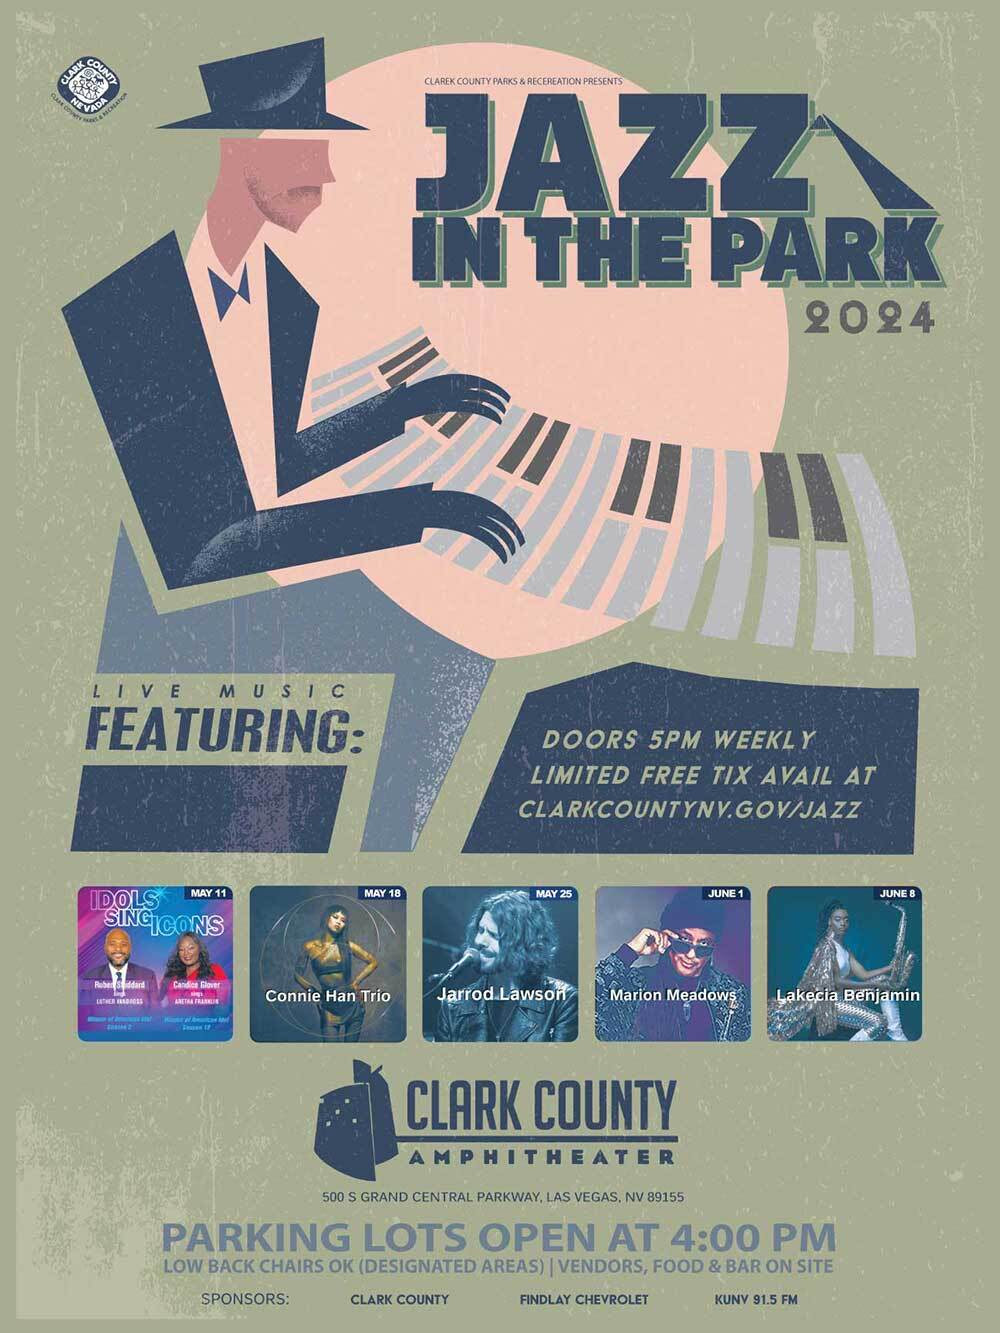 Jazz In The Park 2024 Doors Open 5PM Weekly Limited Free Tix Availabe at: Clarkcountynv.gov/jazz May 11th: Mat 18th: Connie Han Trio May 25th: Jarrod Lawson June 1st: Marlon Meadows June 8th: Lakecia Benjamin Parking Lots open at 4 PM